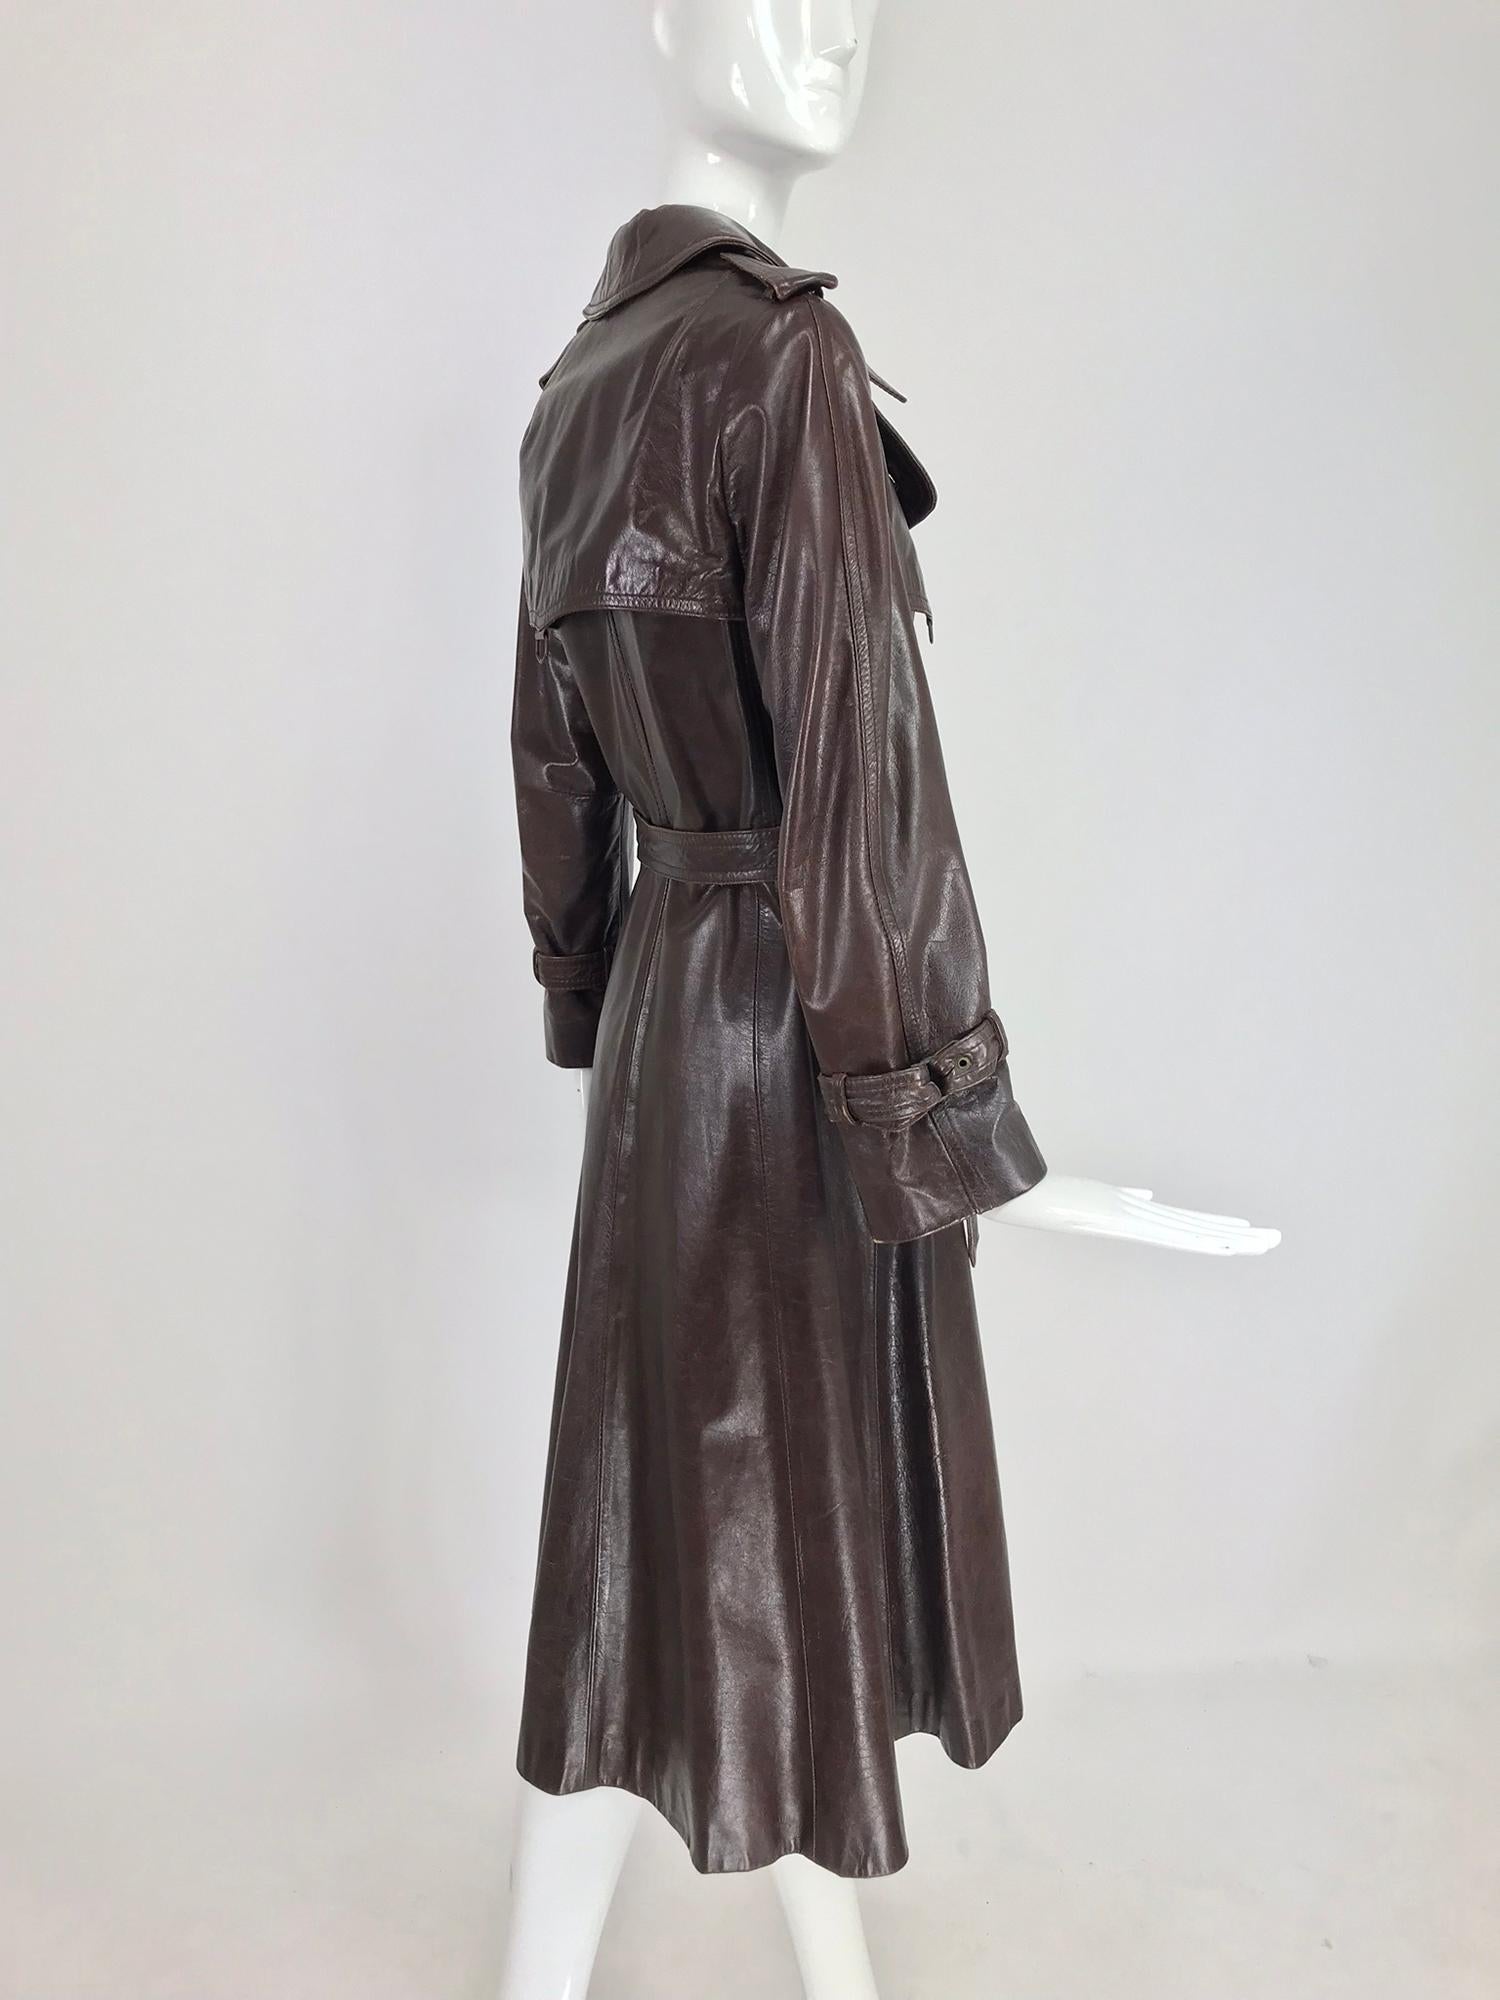 Anne Klein Chocolate brown leather trench coat 1970s 3